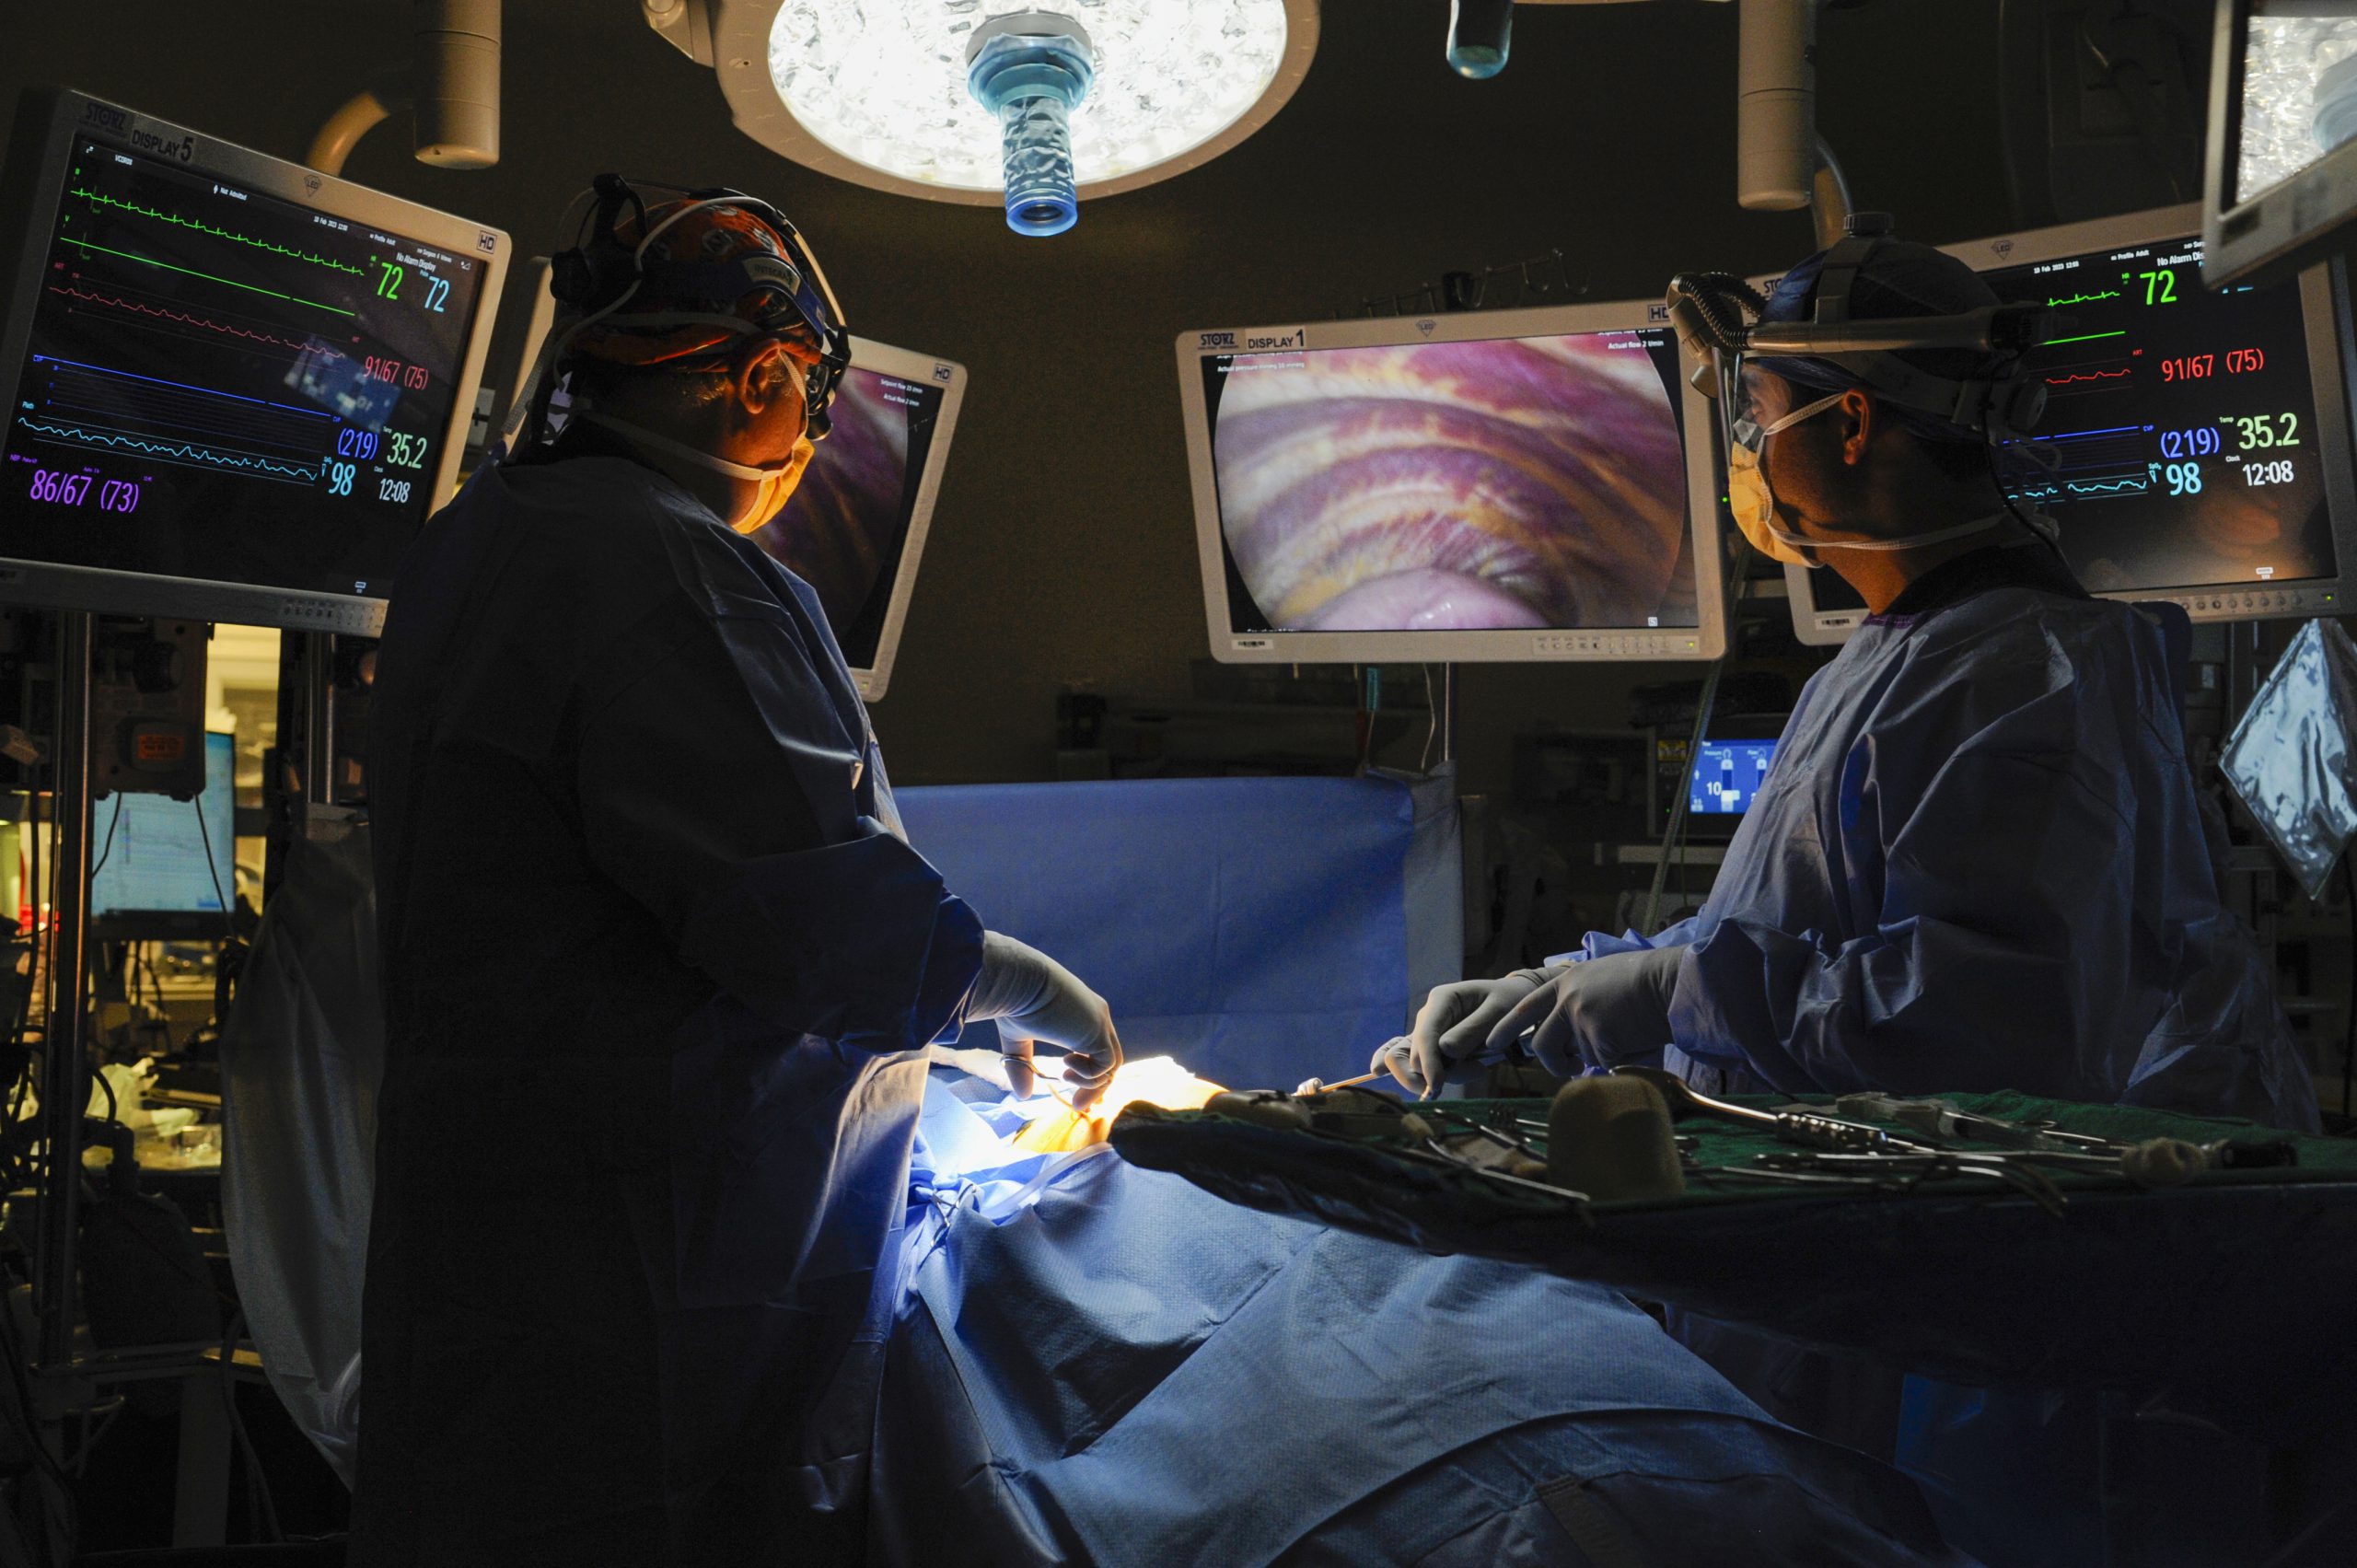 Surgeons operate on a patient while looking at computer screens.